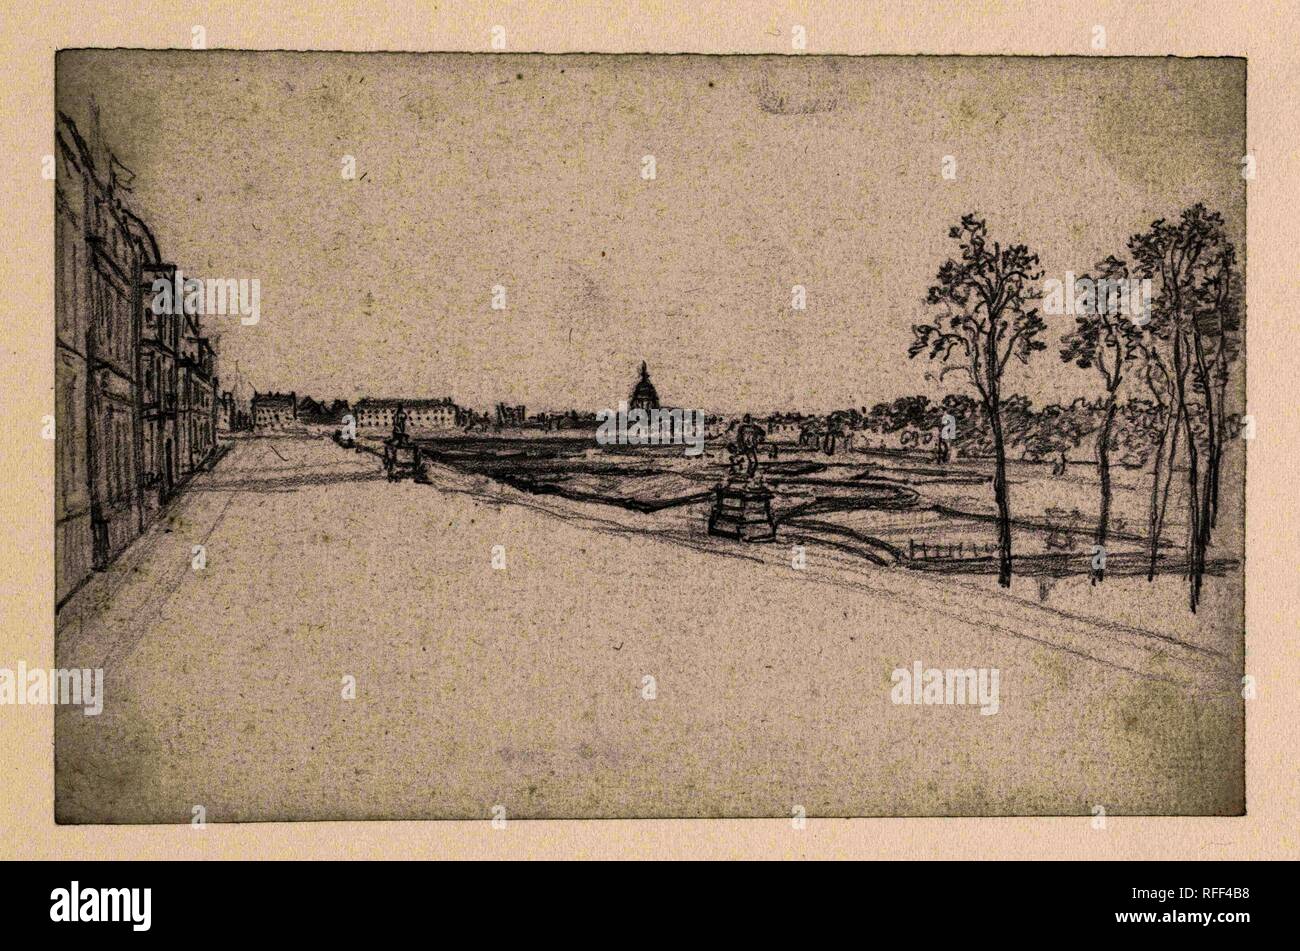 View of the Dome des Invalides from the Champ de Mars. Draughtsman: Georges Michel. Dating: 1773 - 1843. Measurements: h 100 mm × w 155 mm. Museum: Rijksmuseum, Amsterdam. Stock Photo